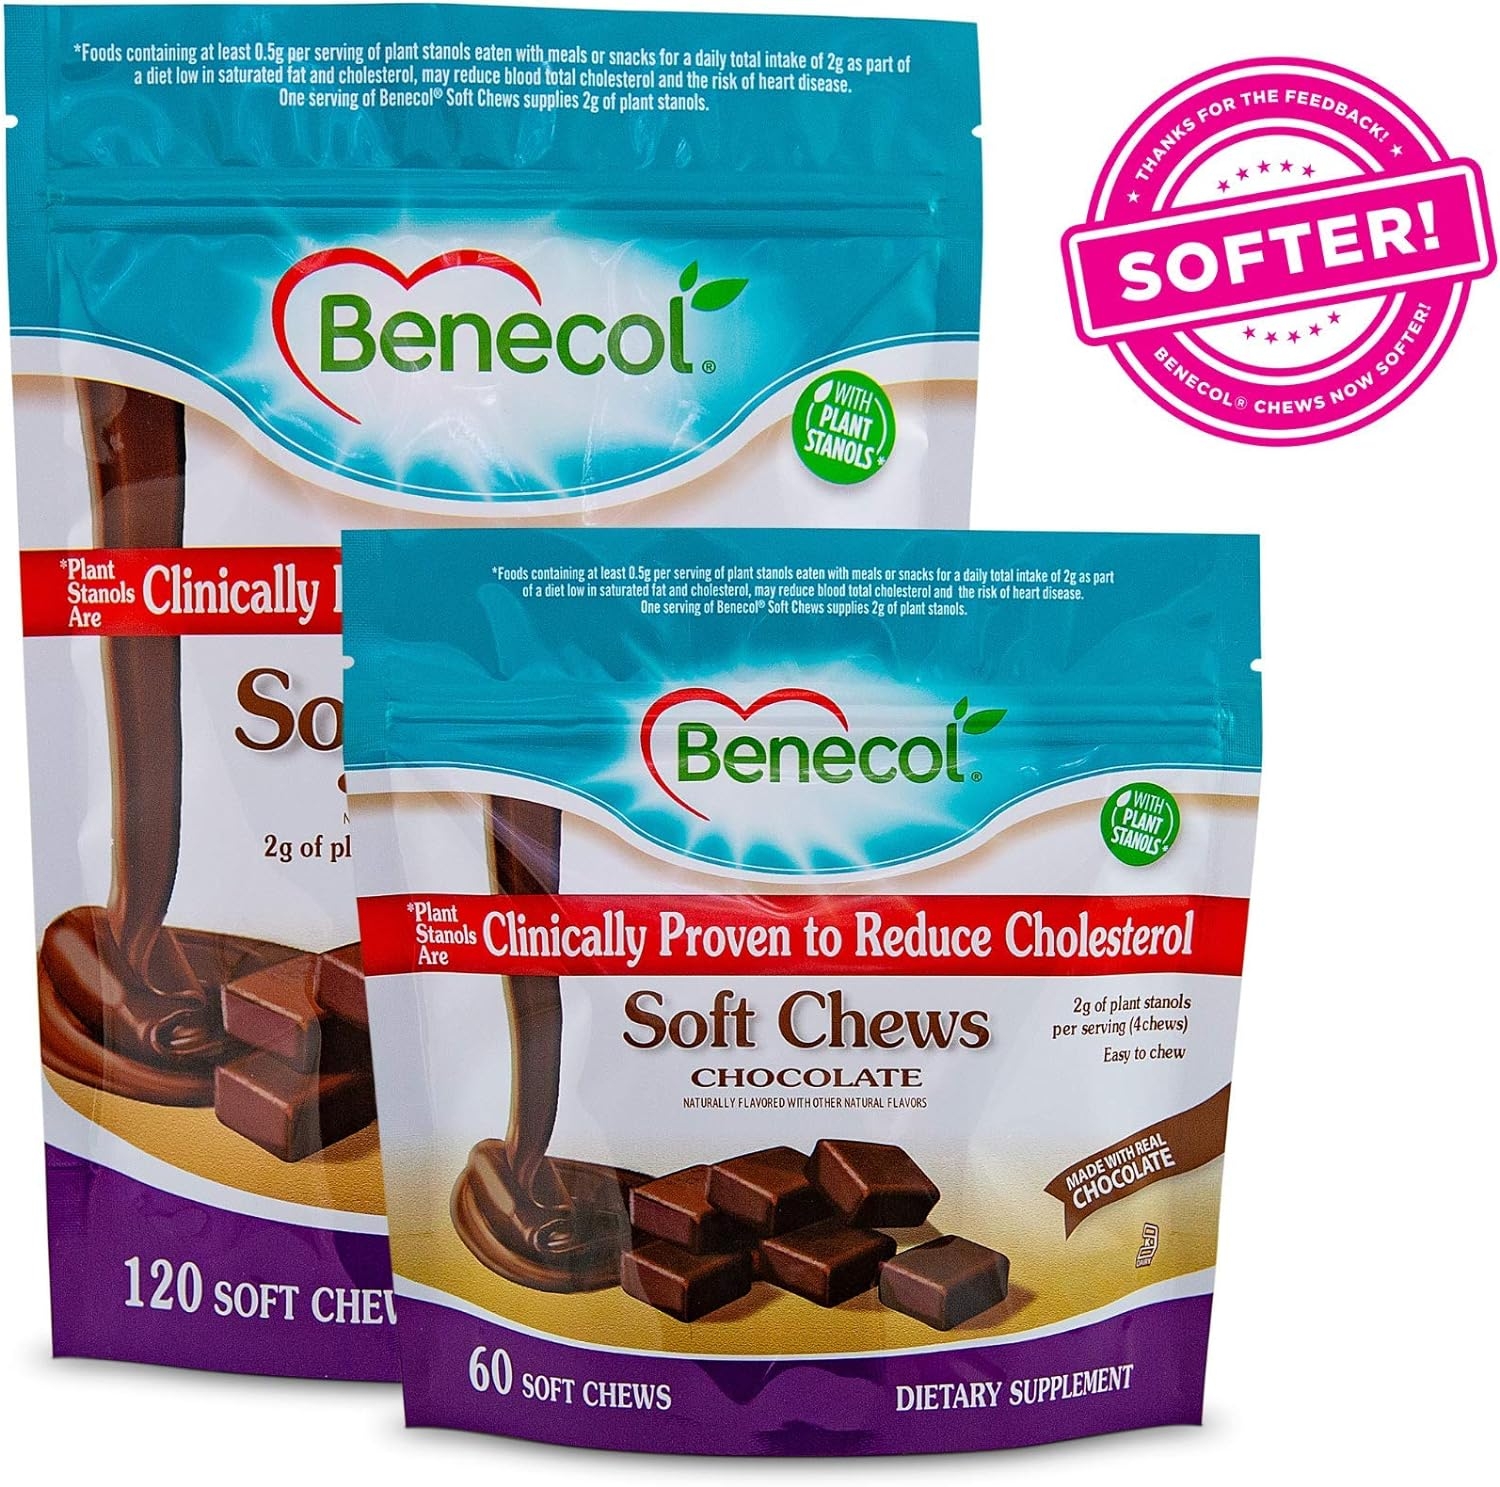 Benecol® Soft Chews - Dietary Supplement Made with Cholesterol-Lowering Plant Stanols, which are Clinically Proven to Reduce Total & LDL Cholesterol* (120 Chocolate Chews)